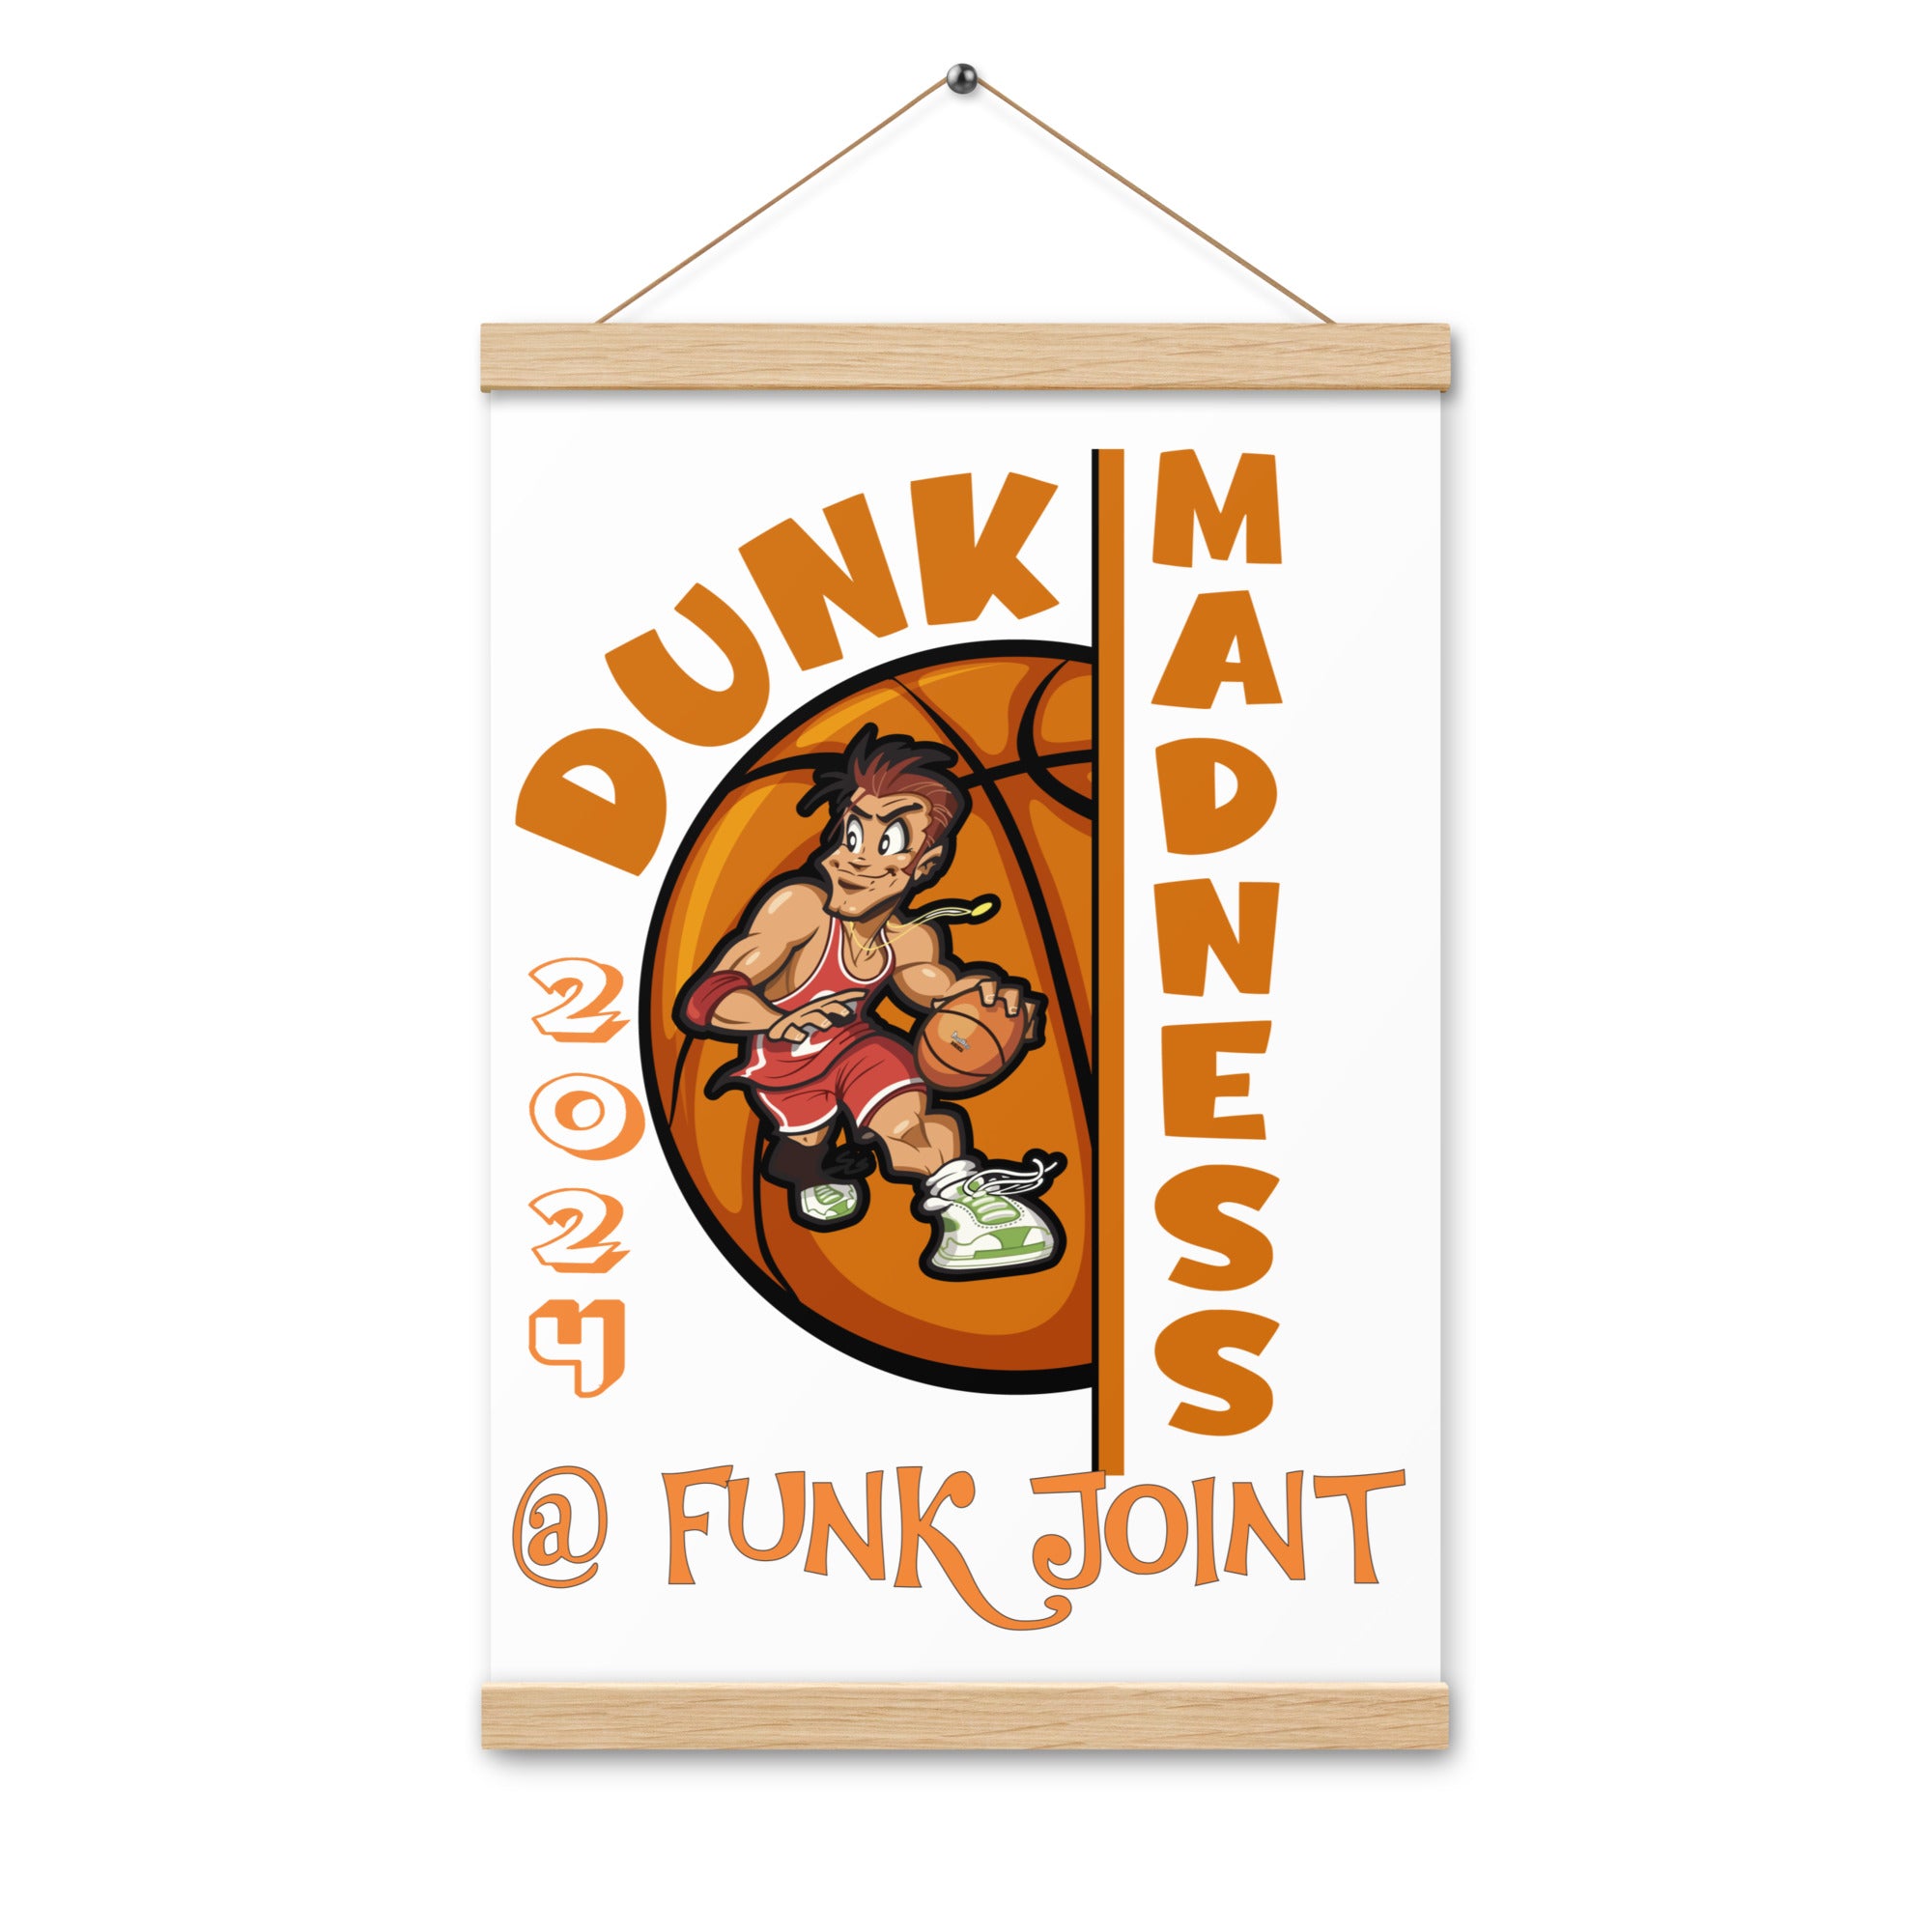 Dunk Madness Poster with hangers